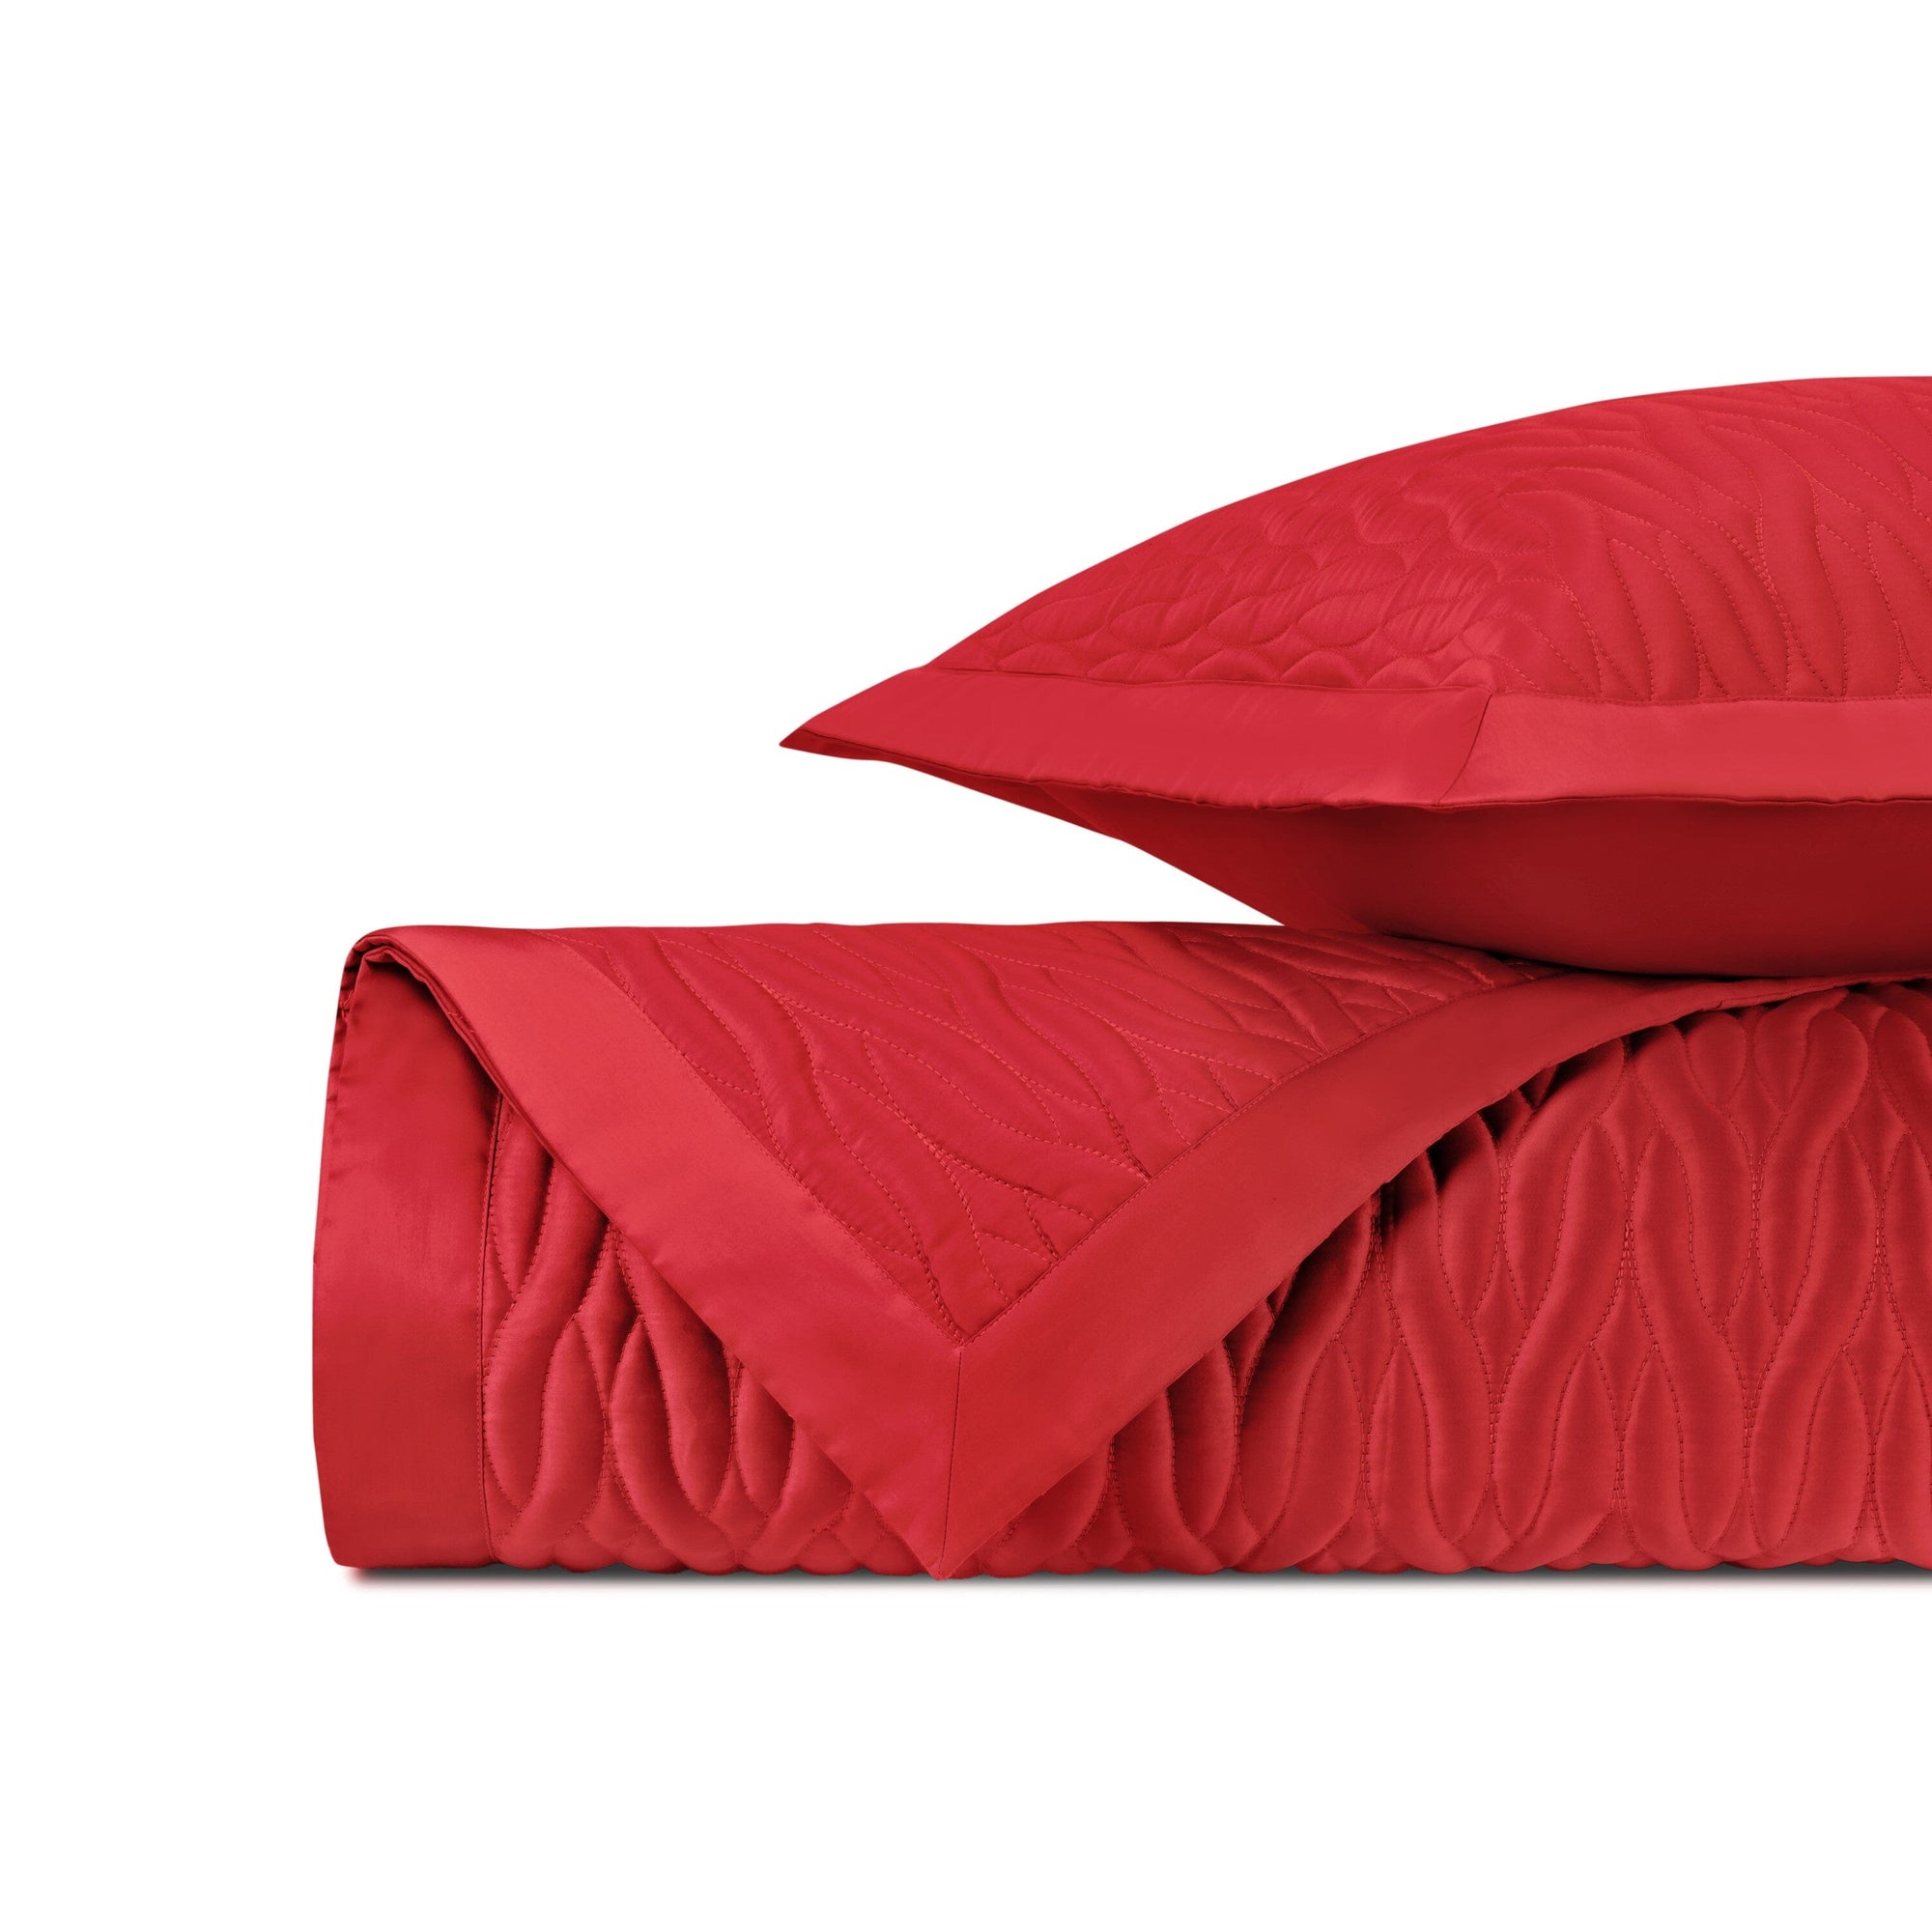 NAPA Quilted Coverlet in Bright Red by Home Treasures at Fig Linens and Home